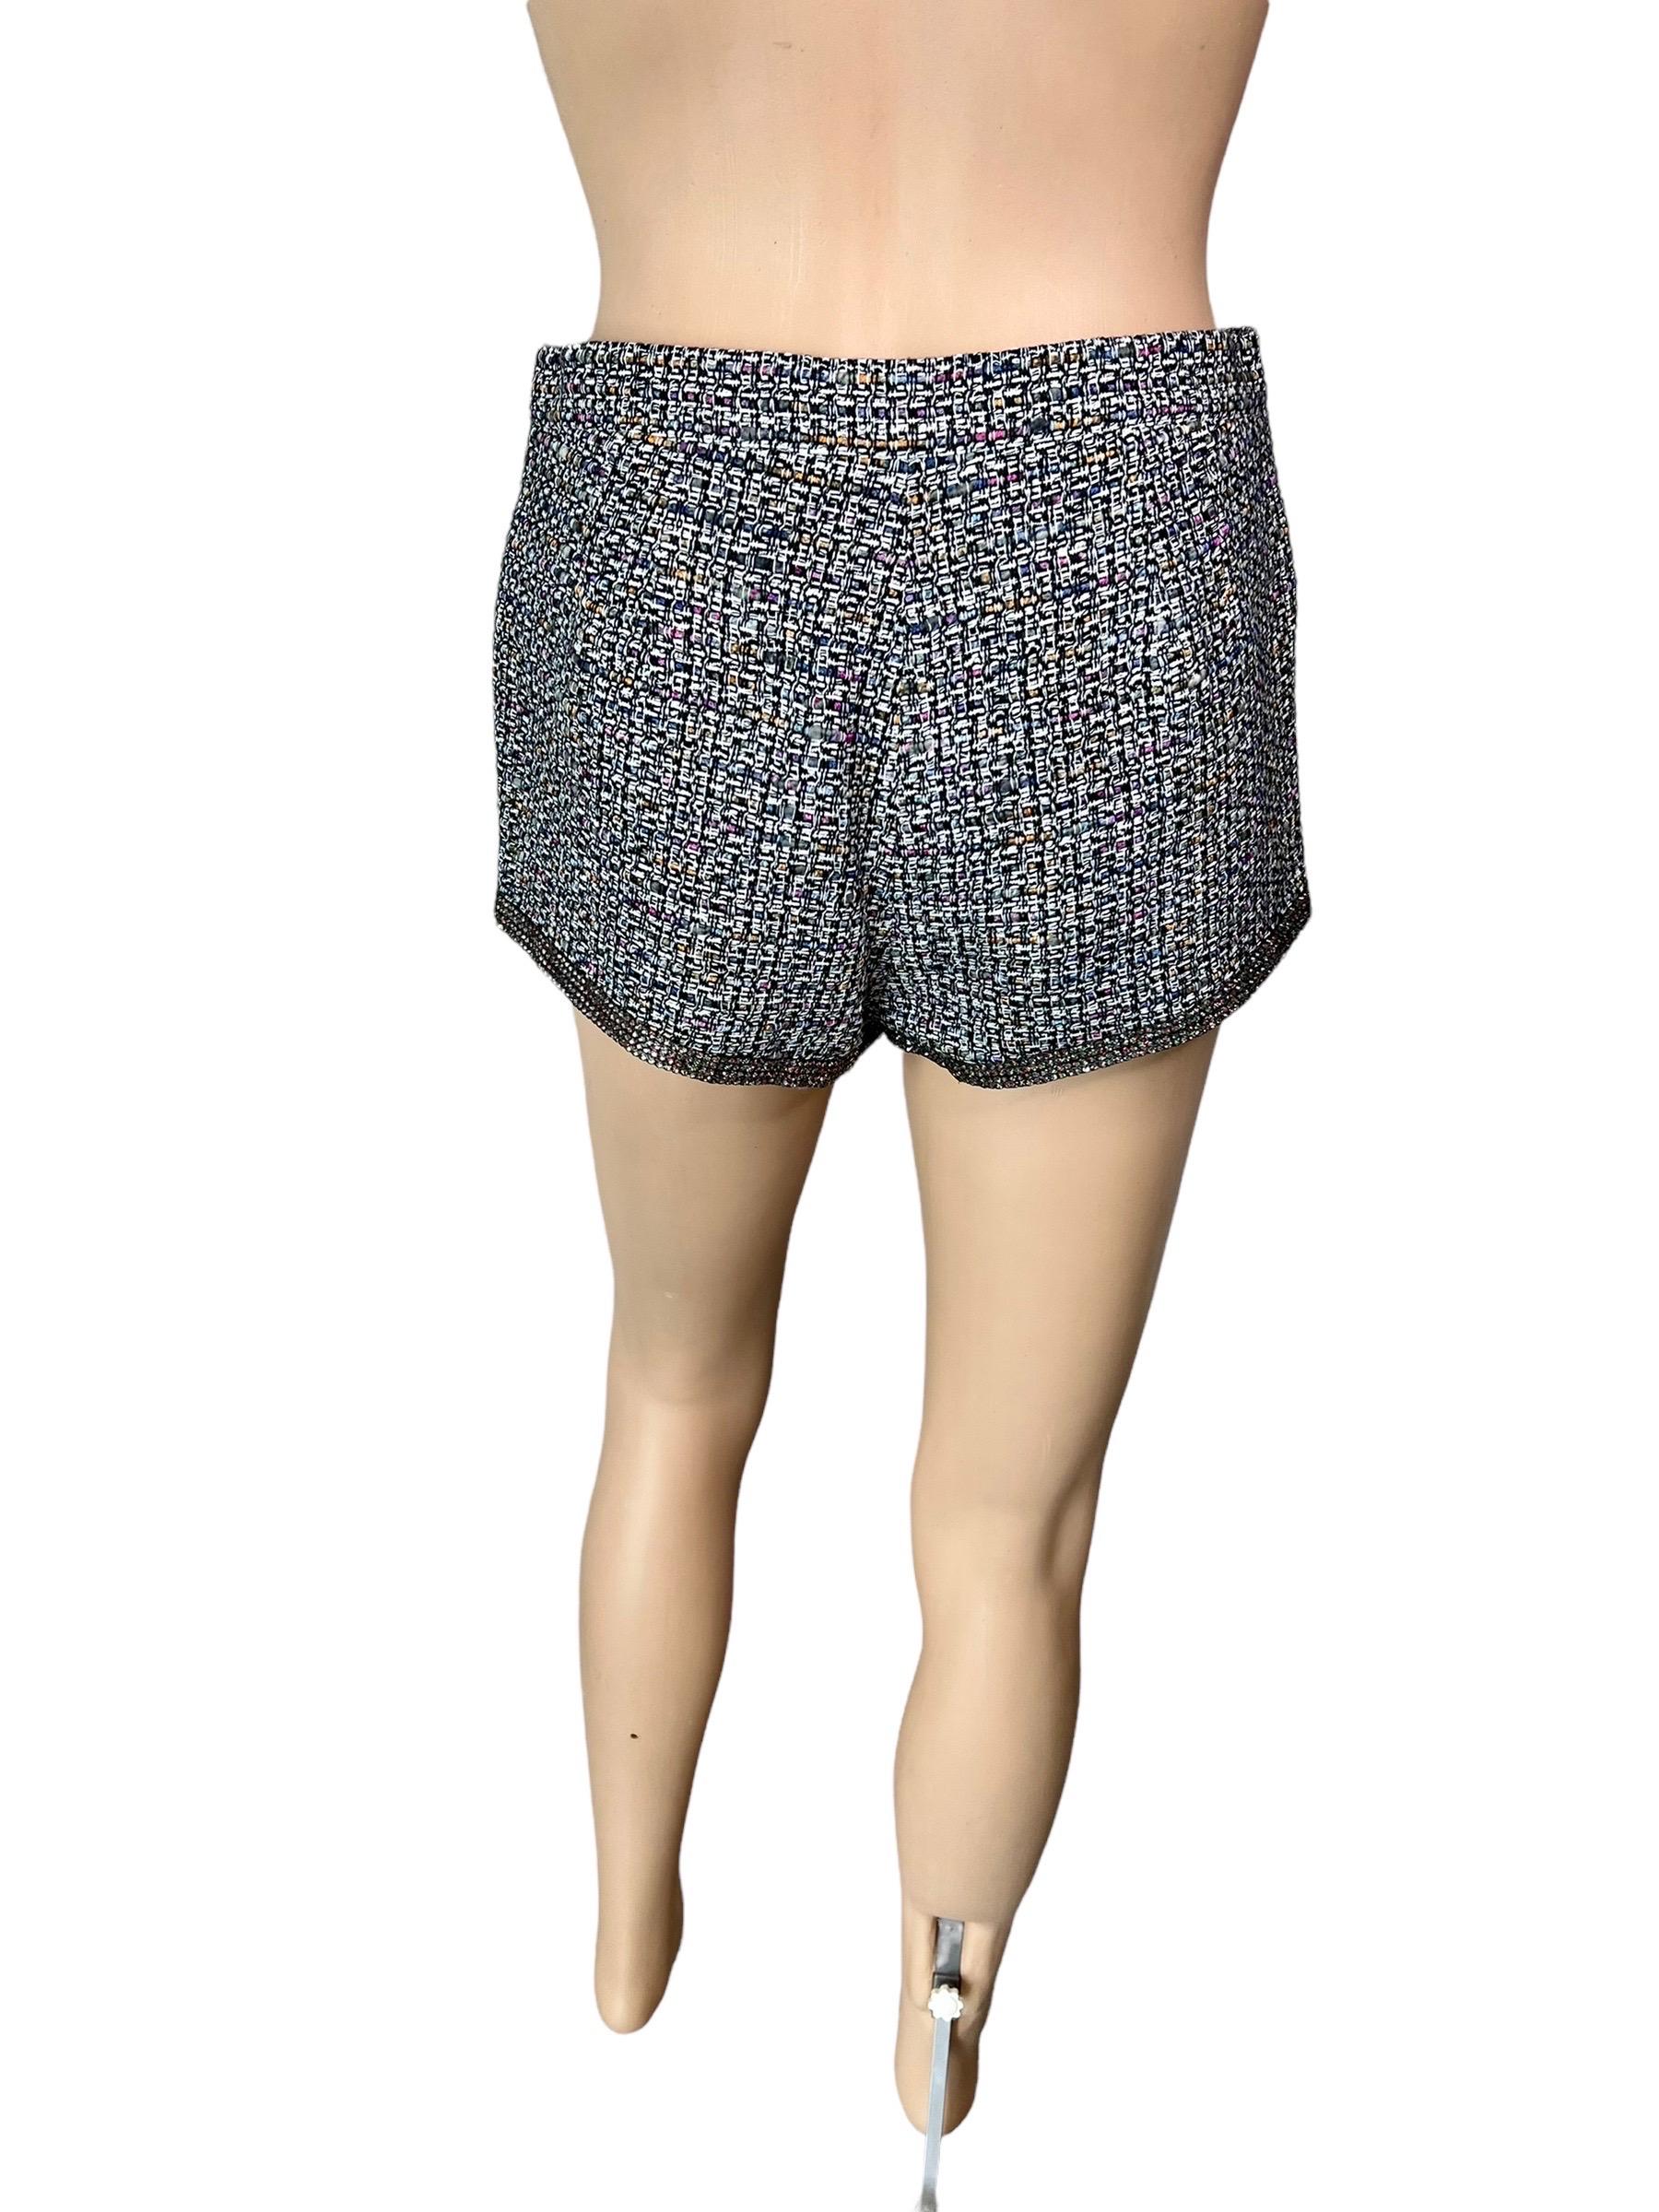 Women's Chanel S/S 2011 Runway CC Logo Crystal Embellished Mini Shorts  For Sale